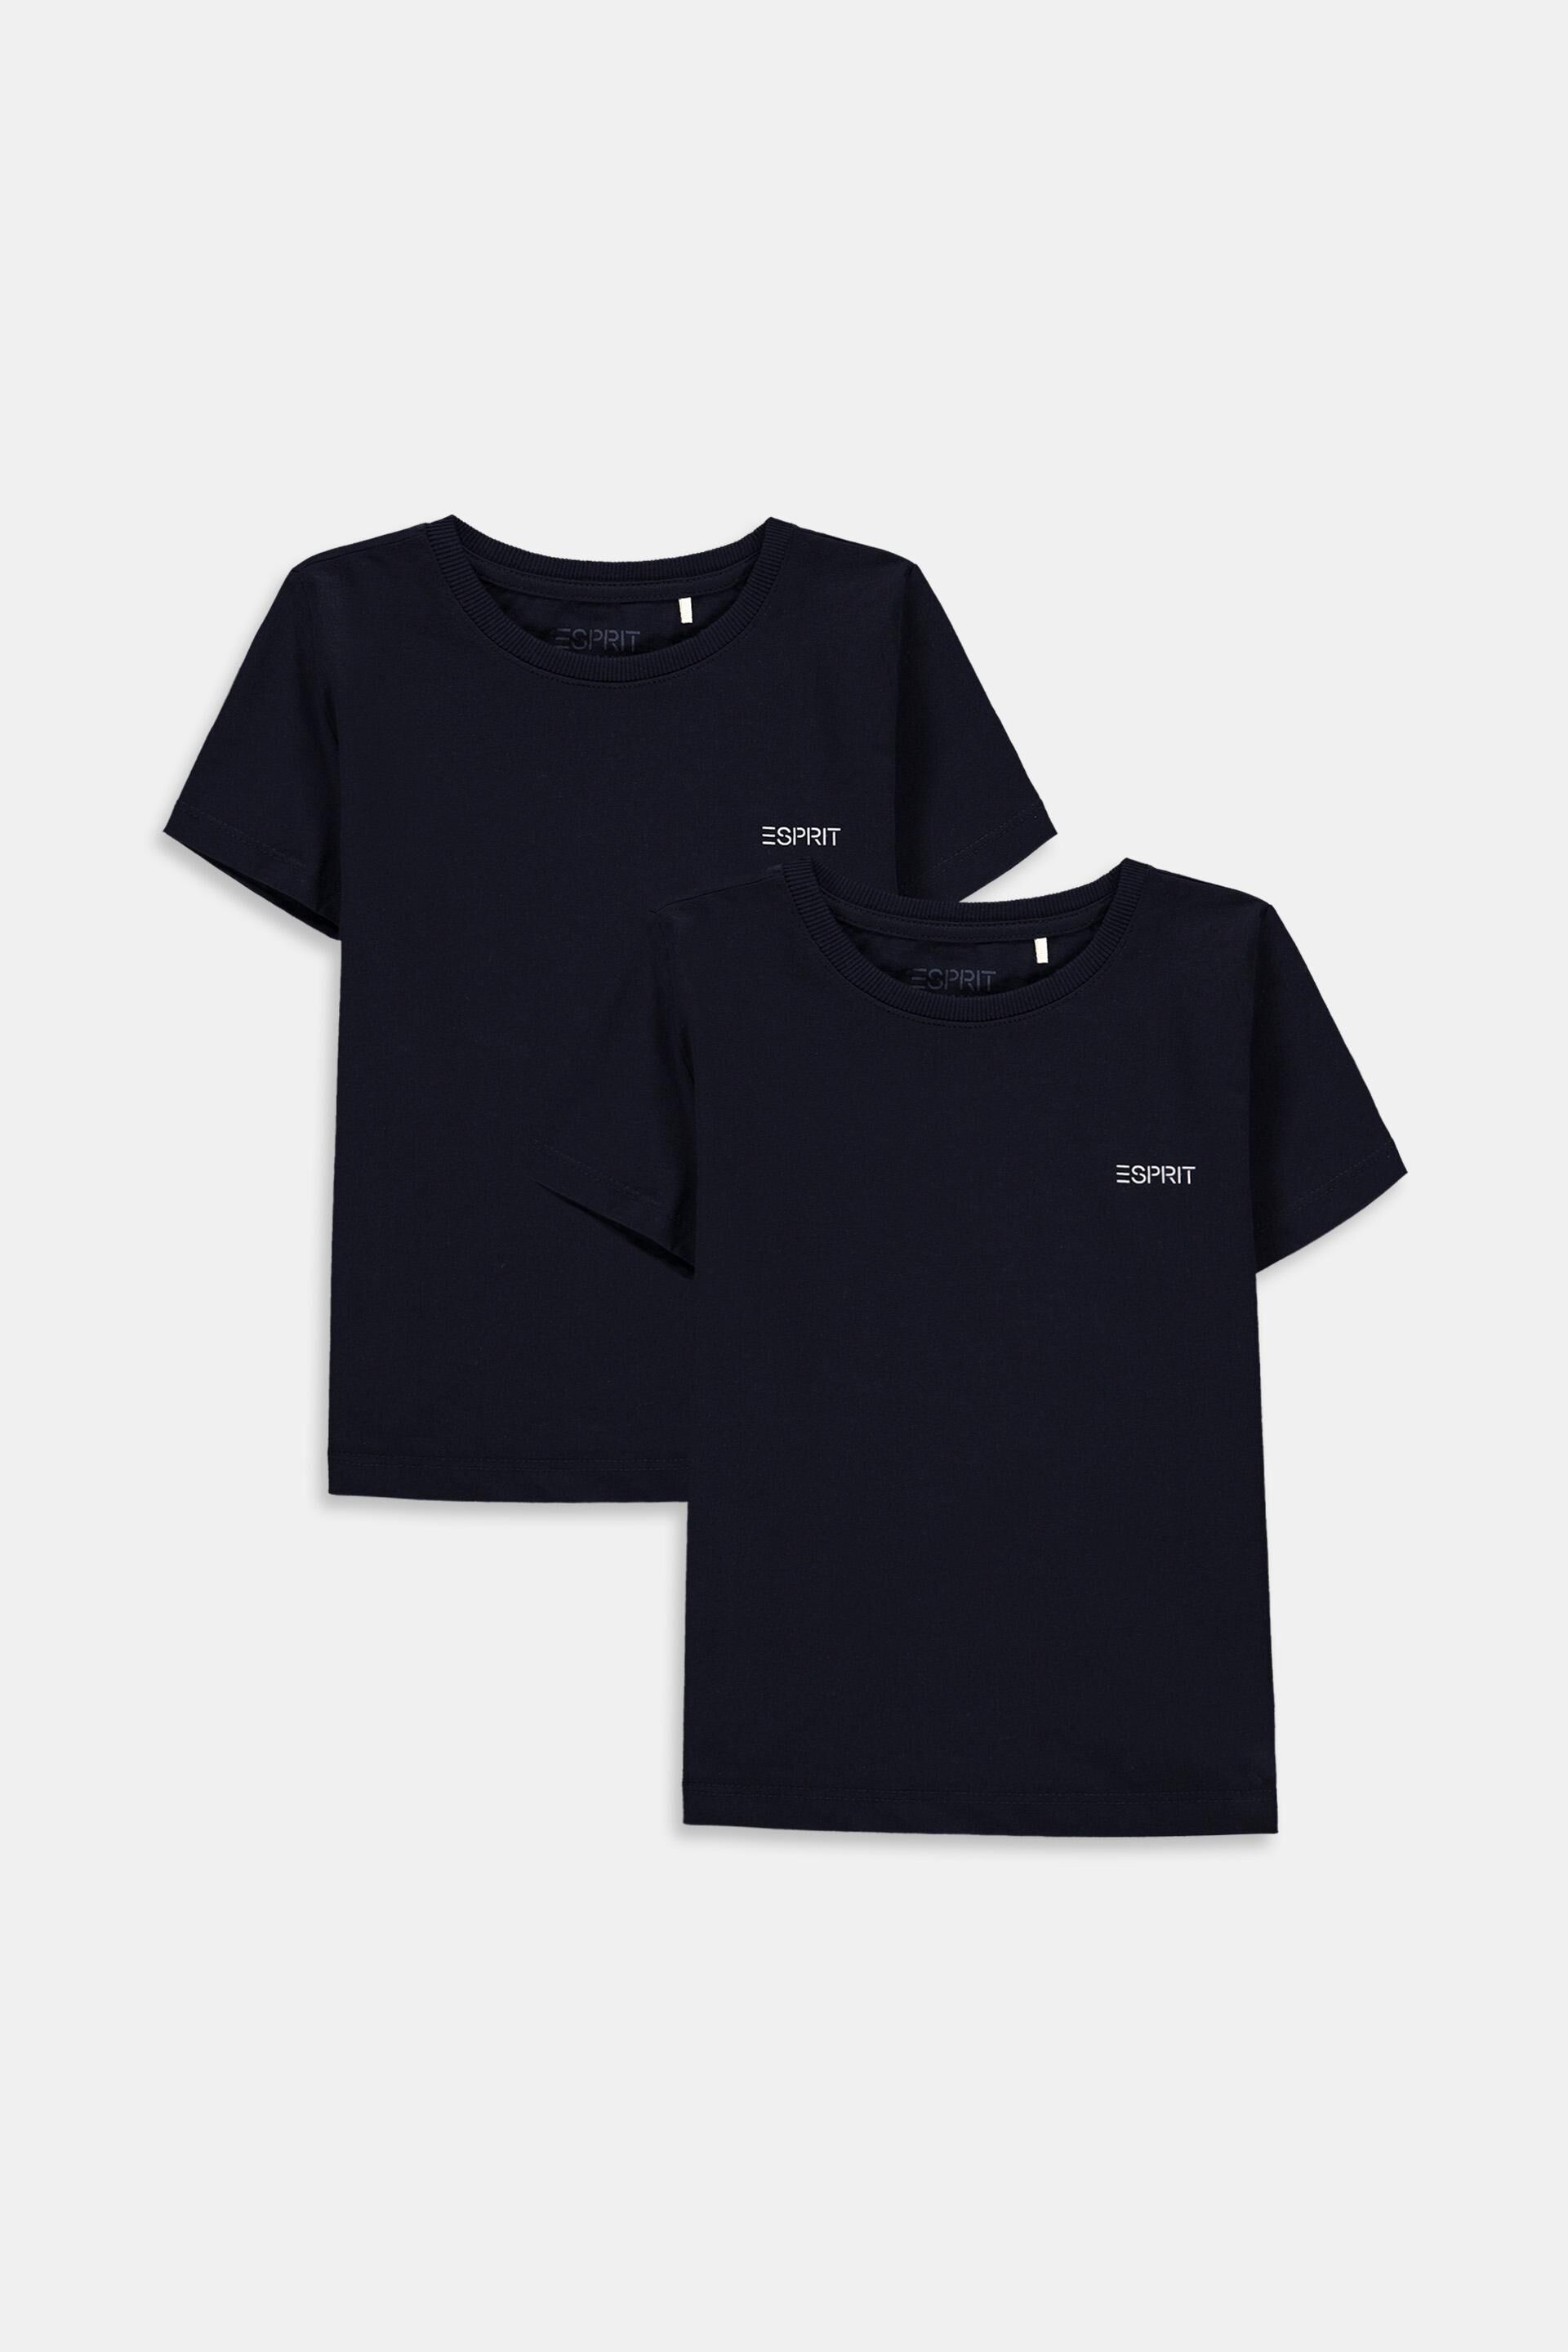 Esprit T-shirts 100% of Double made pack cotton